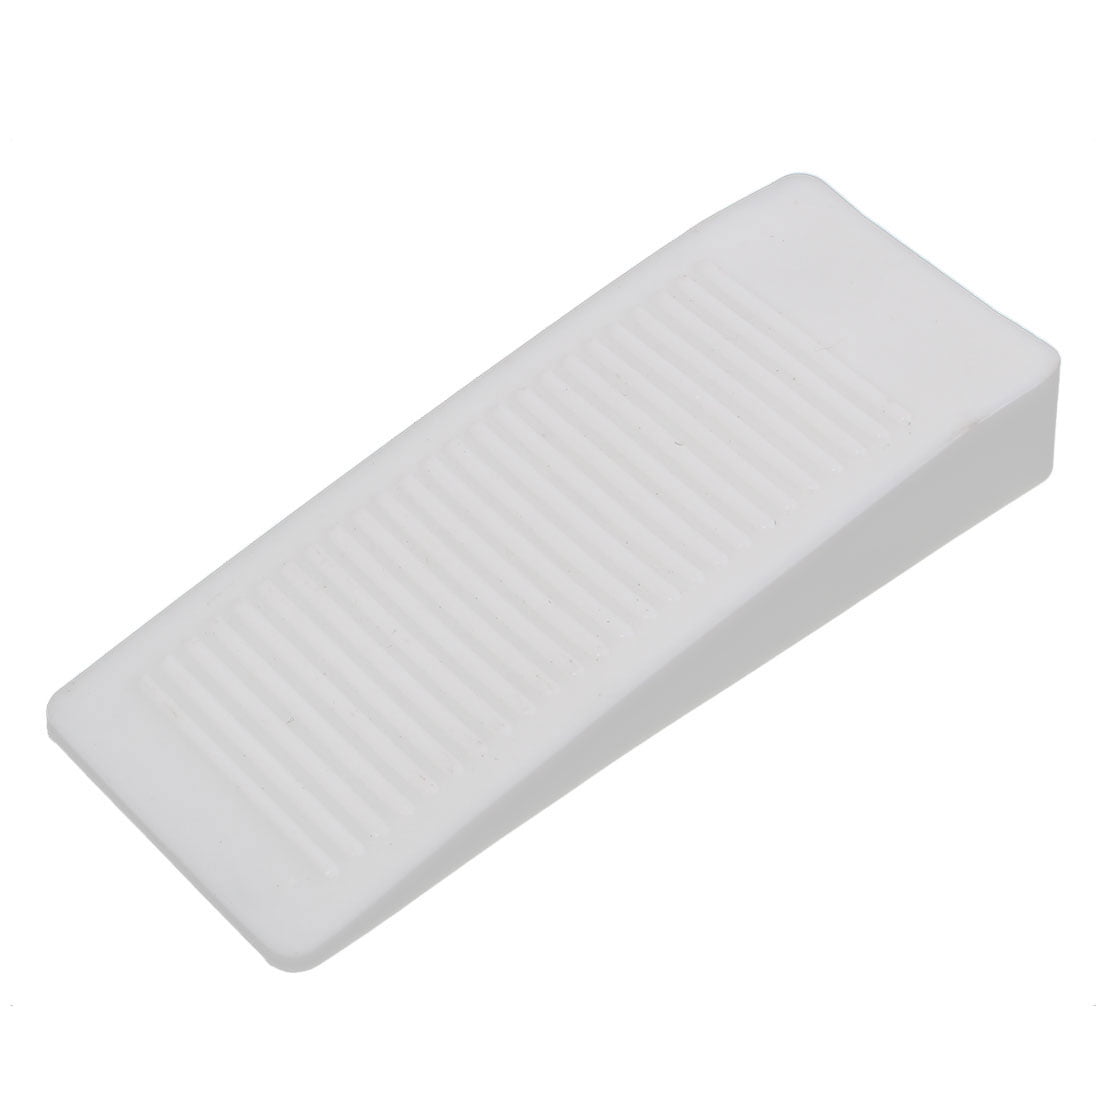 28mm 3 x White Rubber Door Stop Floor Mounted Wedge Stopper Small Size 